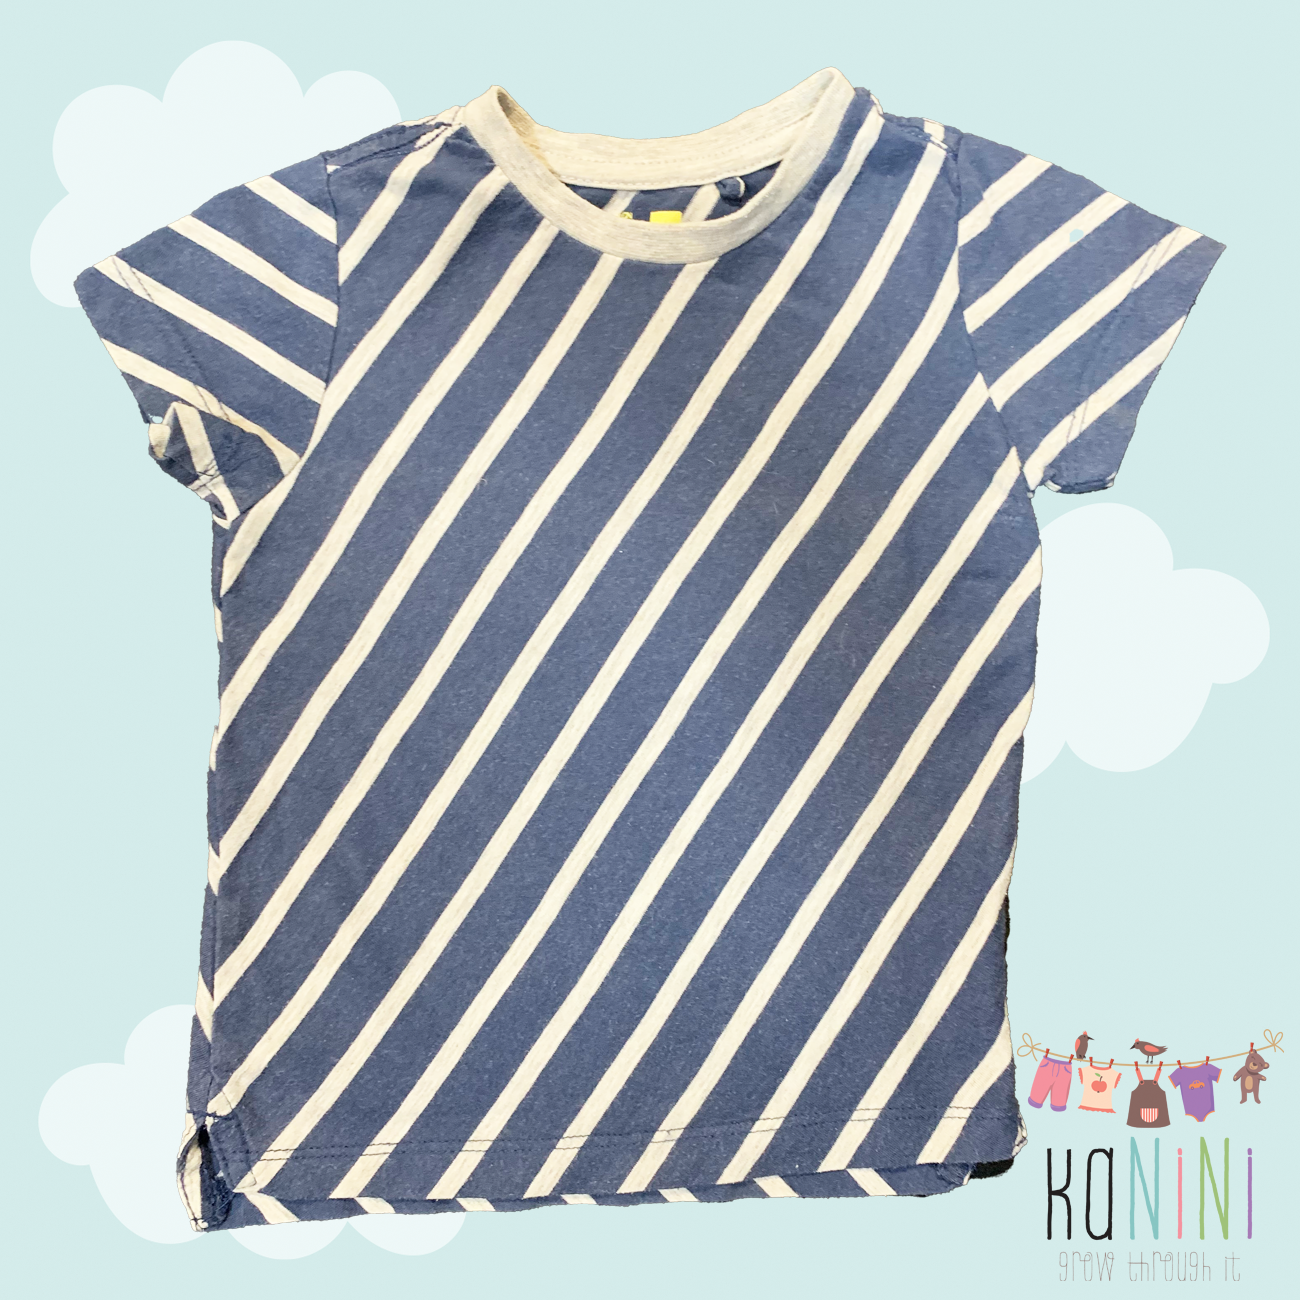 Featured image for “Cotton On 12-18 Months Boys t-Shirt”